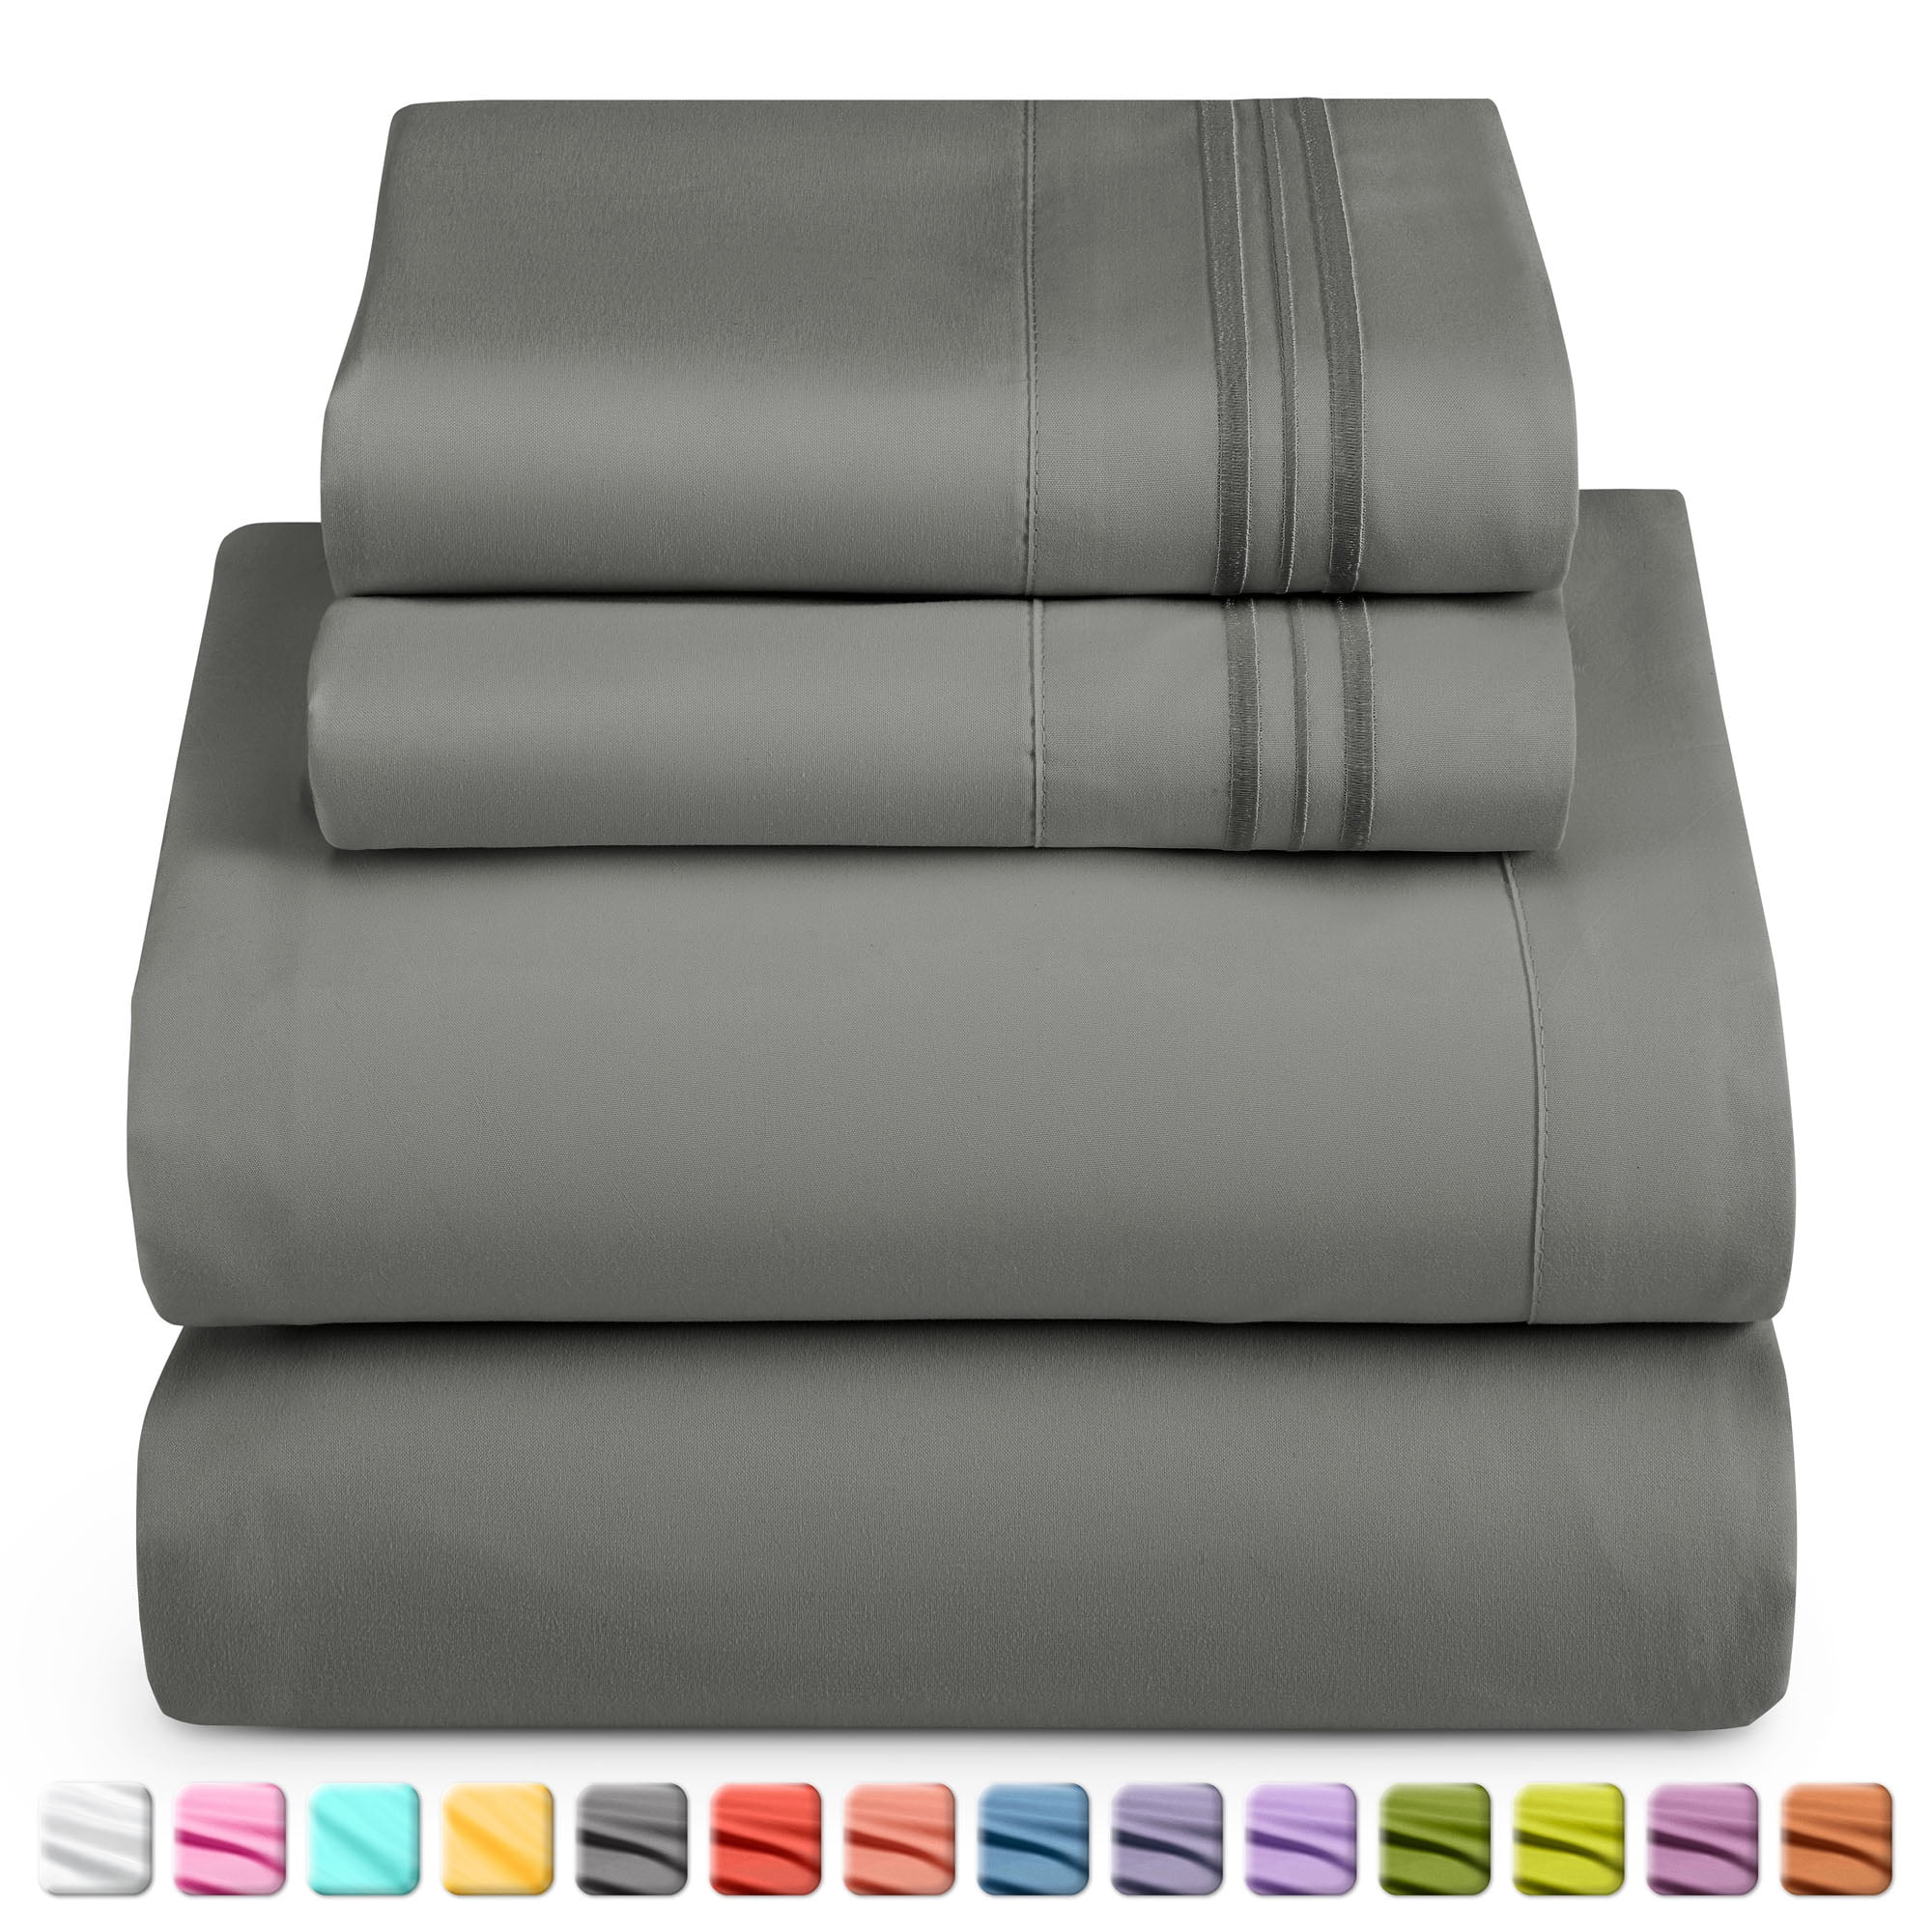 Nestl Bed Sheets Set, 1800 Series Deep Pocket 4 Piece Bedding, Luxury Soft Microfiber Queen Sheets Sets, Charcoal Stone Gray - image 1 of 7